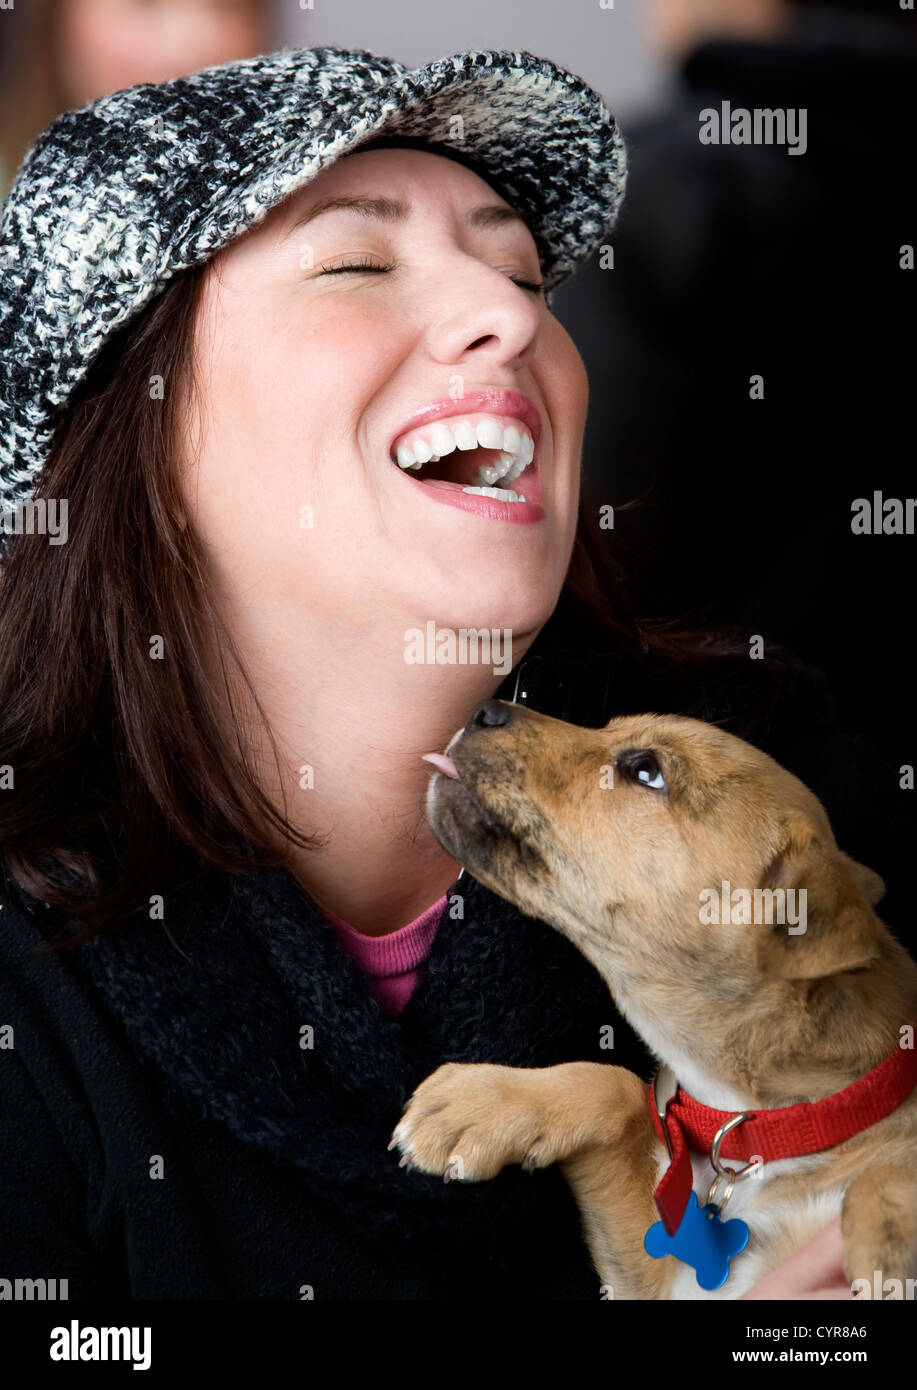 Hispanic woman being licked on the neck by small dog Stock Photo